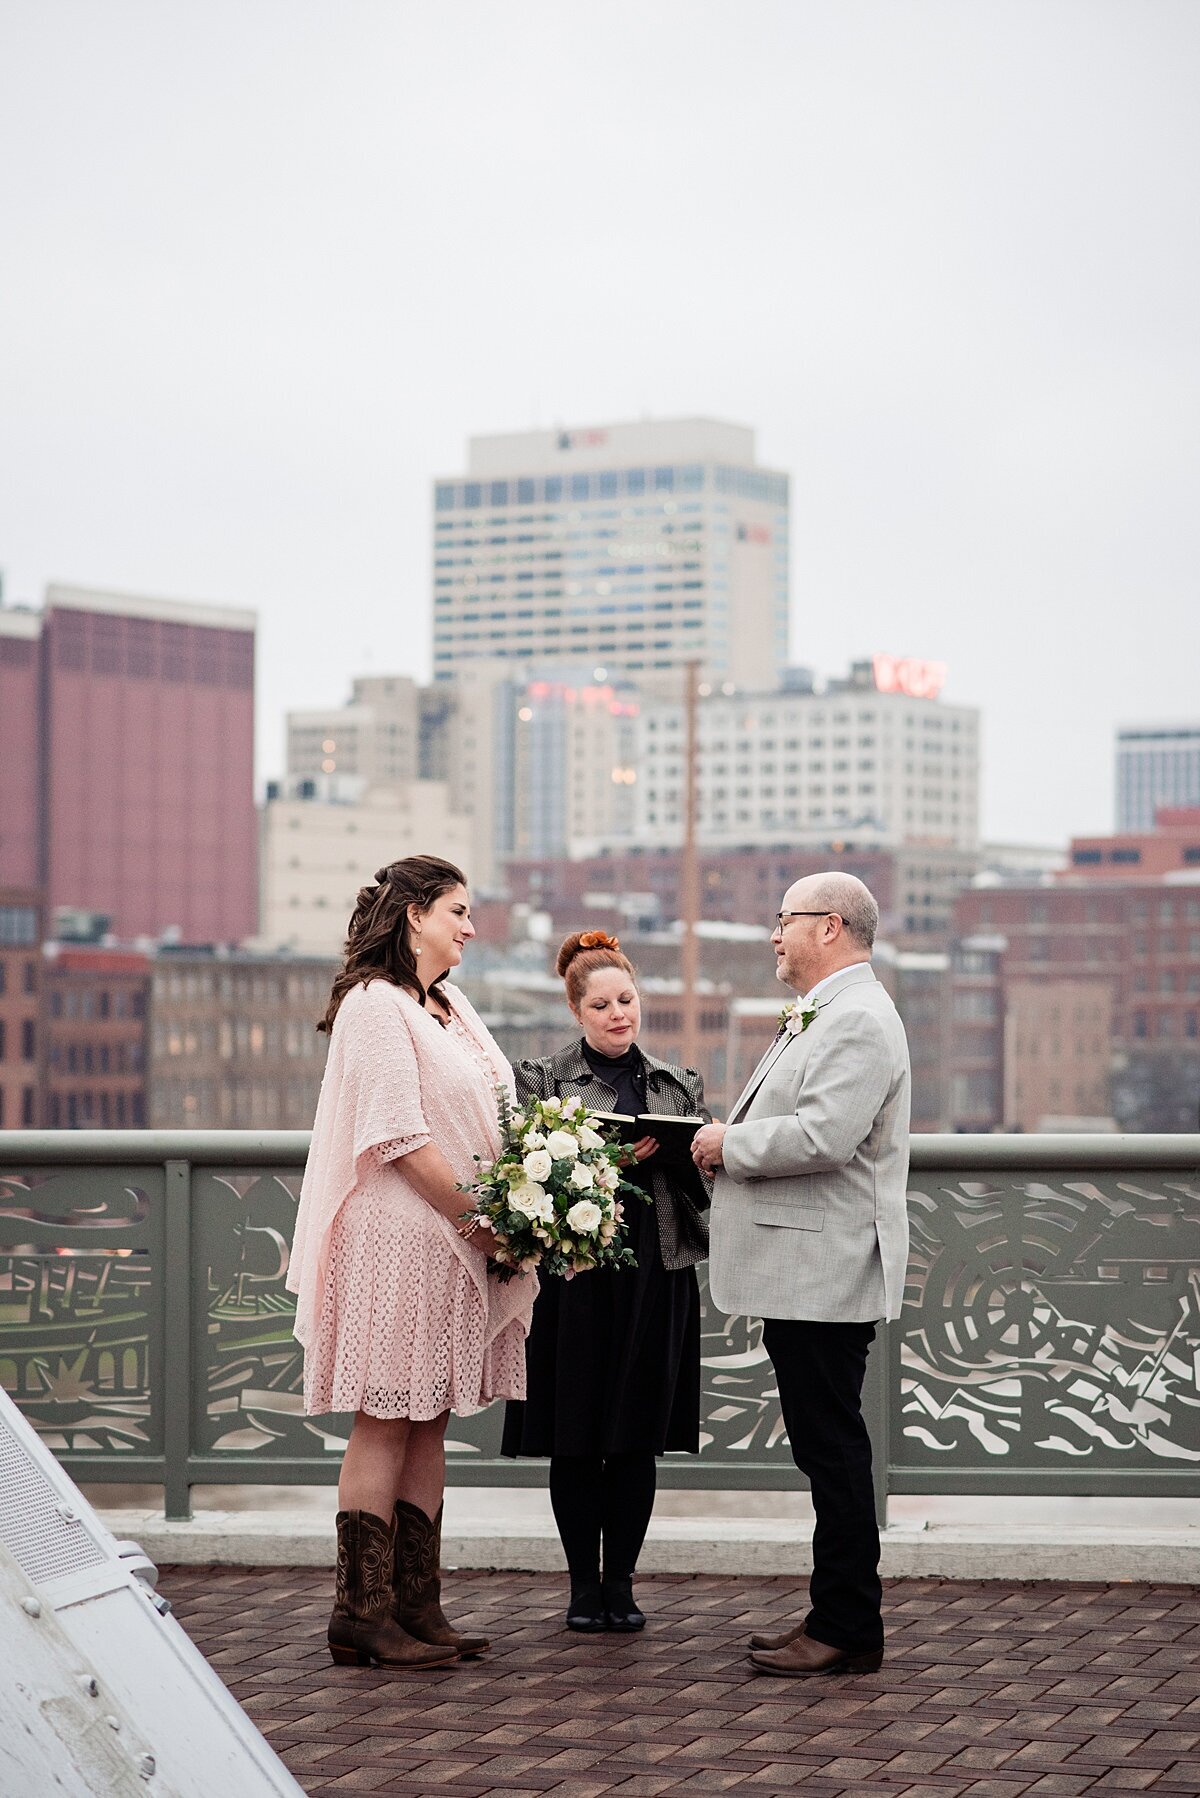 The bride and groom stand with their officiant on the Pedestrian Bridge in Nashville with the Nashville Skyline behind them. The bride is wearing a flowing knee length gauze  boho dress with elbow length sleeves and brown cowboy boots. The groom is wearing a light gray jacket and black pants. The bride is holding a large white bouquet  as she and the groom smile at each other. The wedding officiant is wearing a black dress with black tights. Her red hair is up in a structured bun. She is reading from a leather bound book as they take their vows.